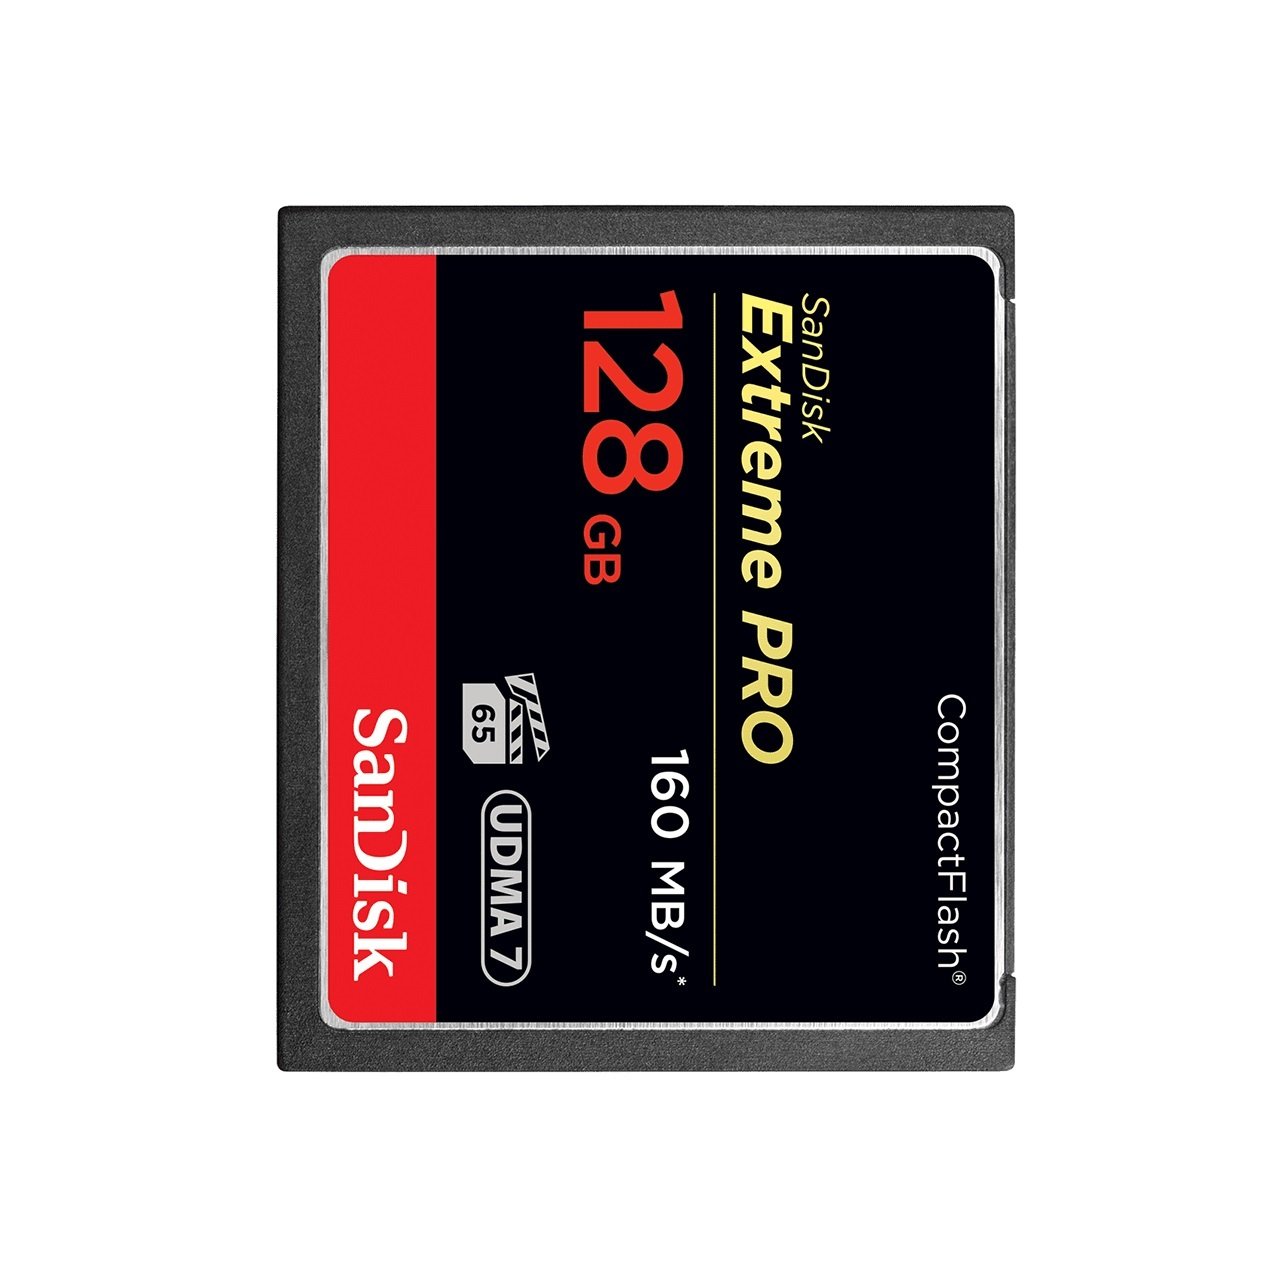 Sandisk Compact Flash Extreme Pro 128GB  pion